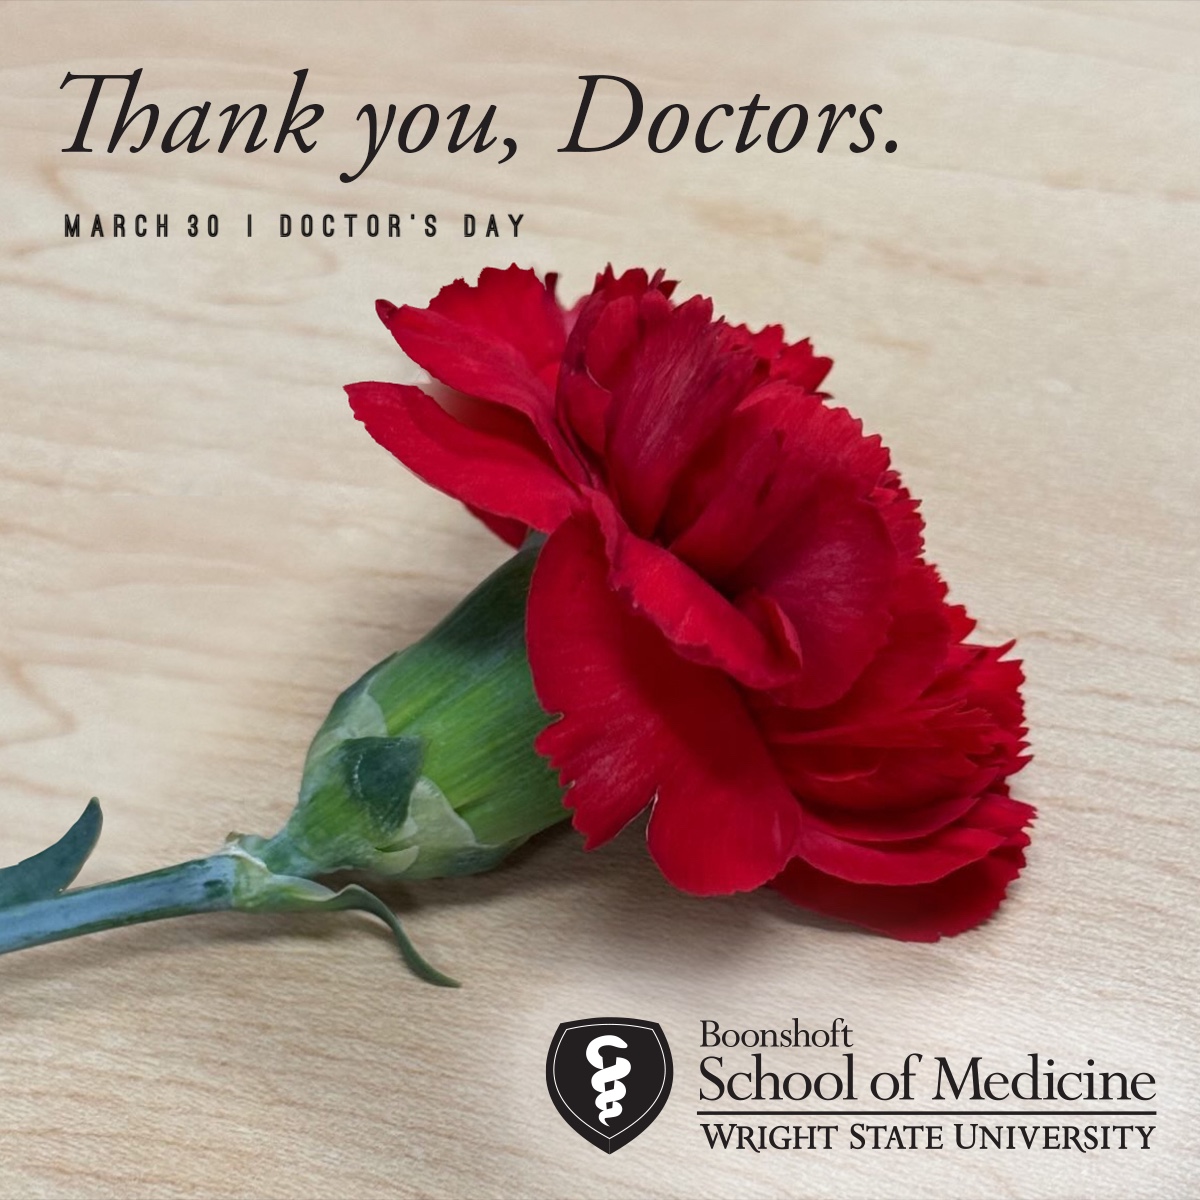 Happy #DoctorsDay! The red carnation stands for adoration, love and respect and depicts this special day. Medical students, residents, alumni and faculty, #BSOM appreciates you! Shout out to our faculty among the 2024 Dayton's Best Docs bit.ly/49axthP.